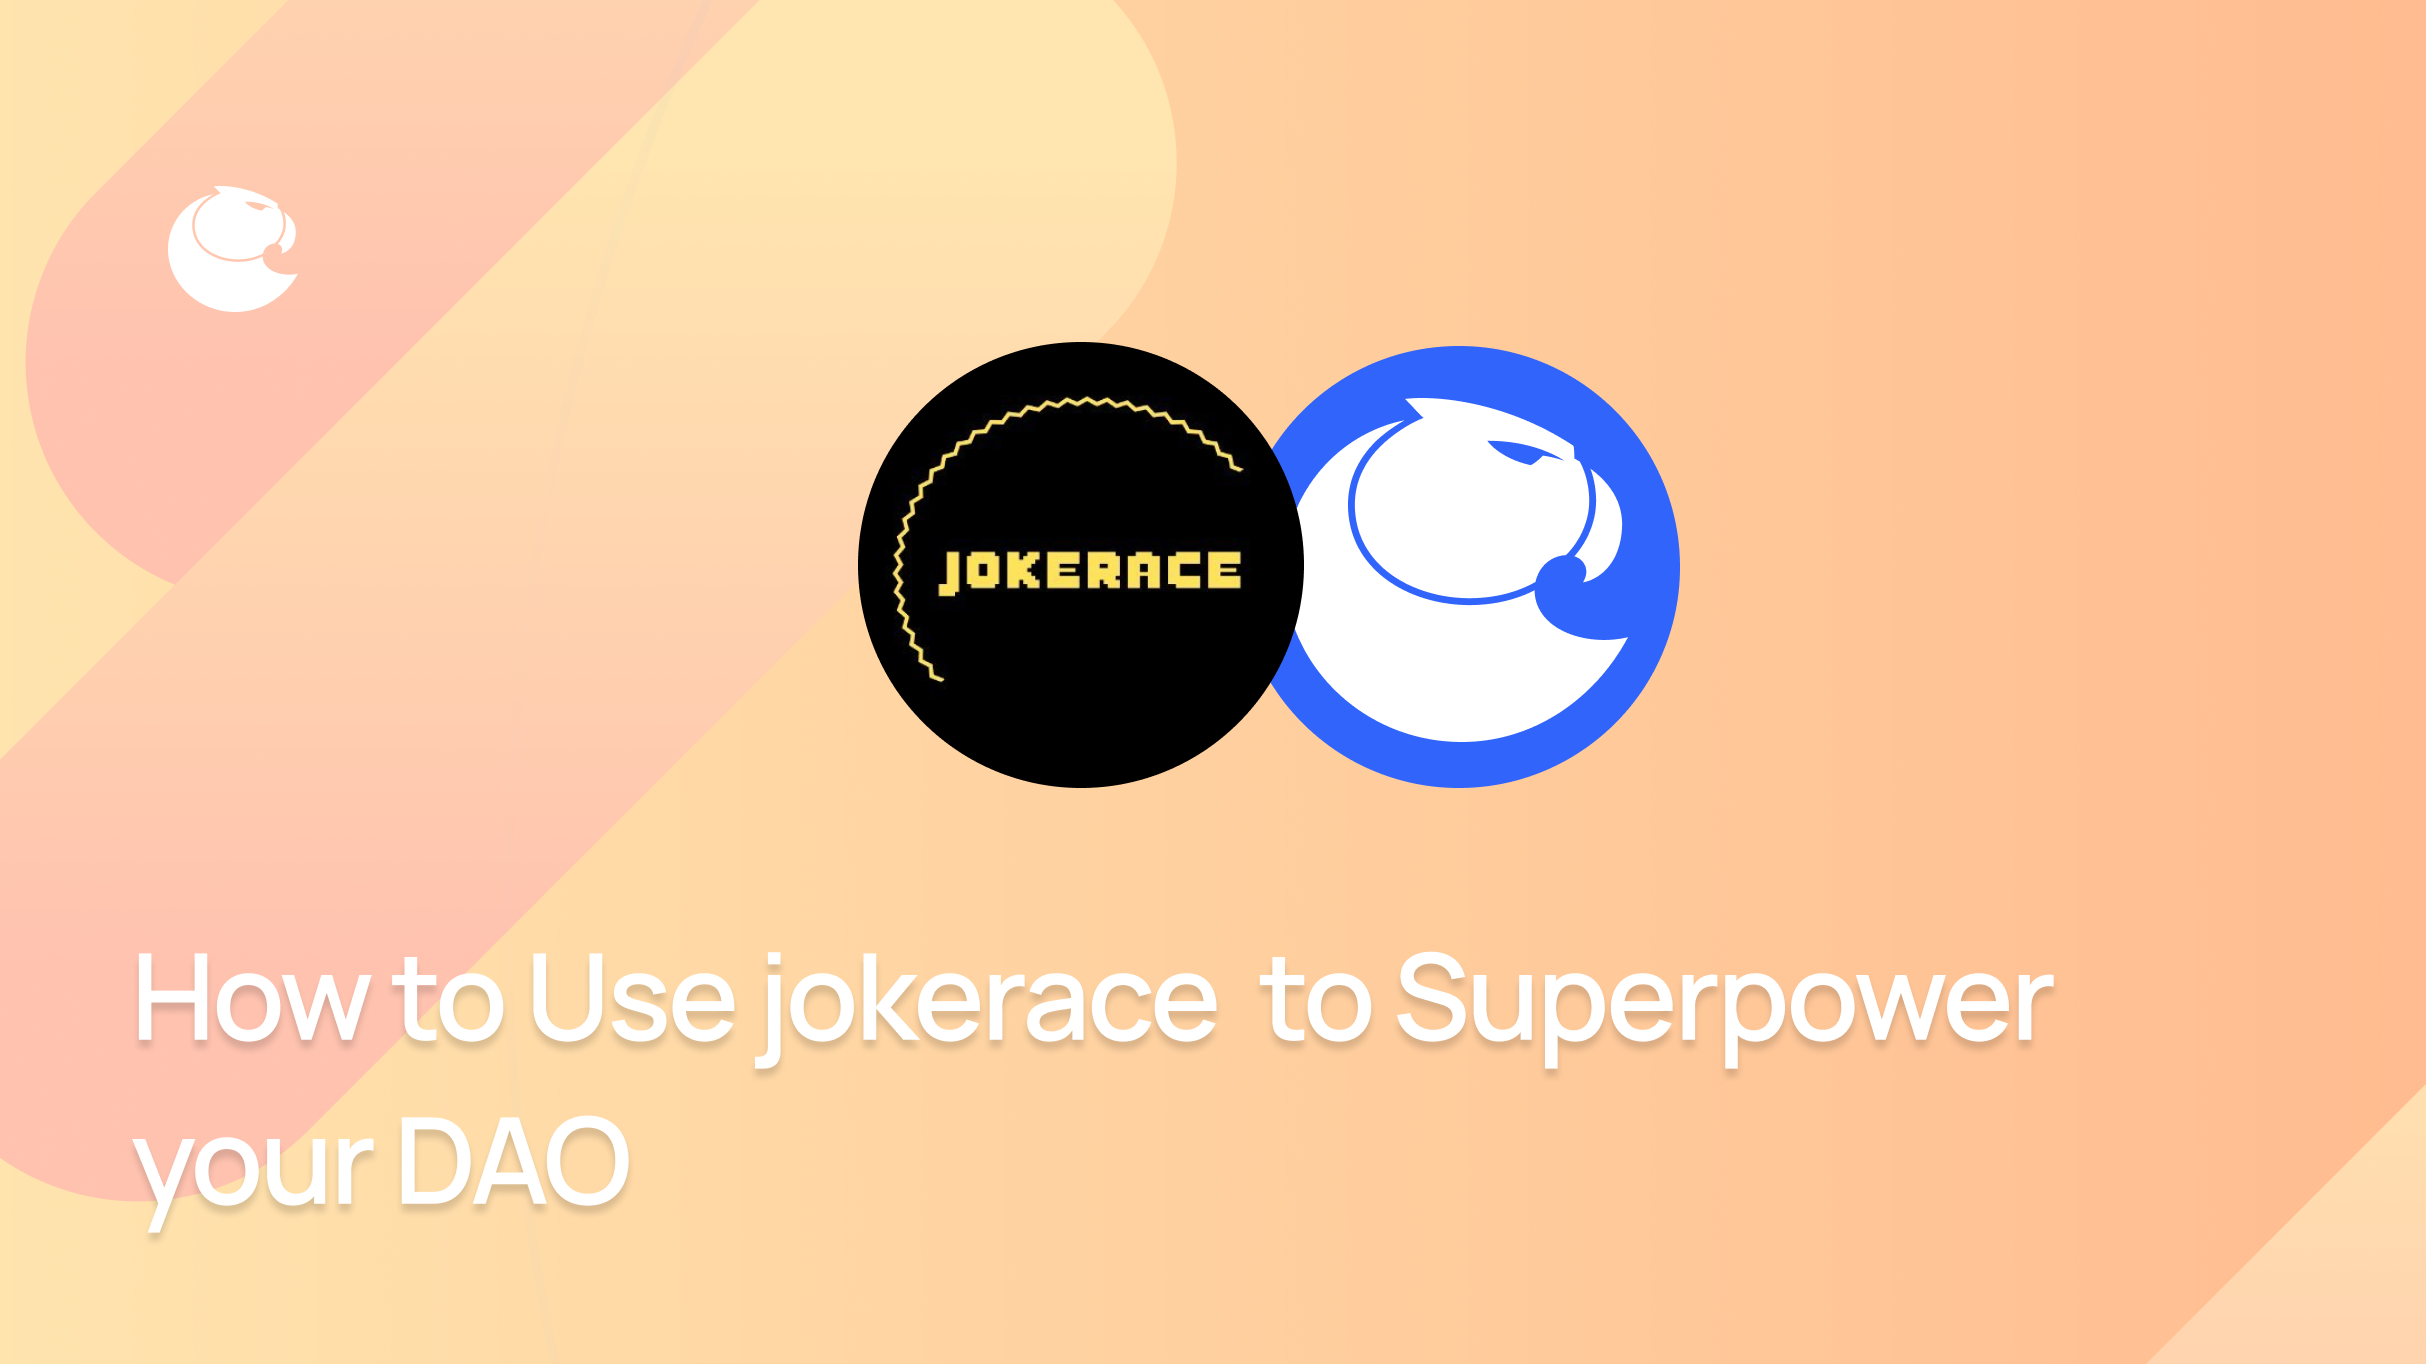 How to Use a jokerace to Superpower your DAO on the Aragon App